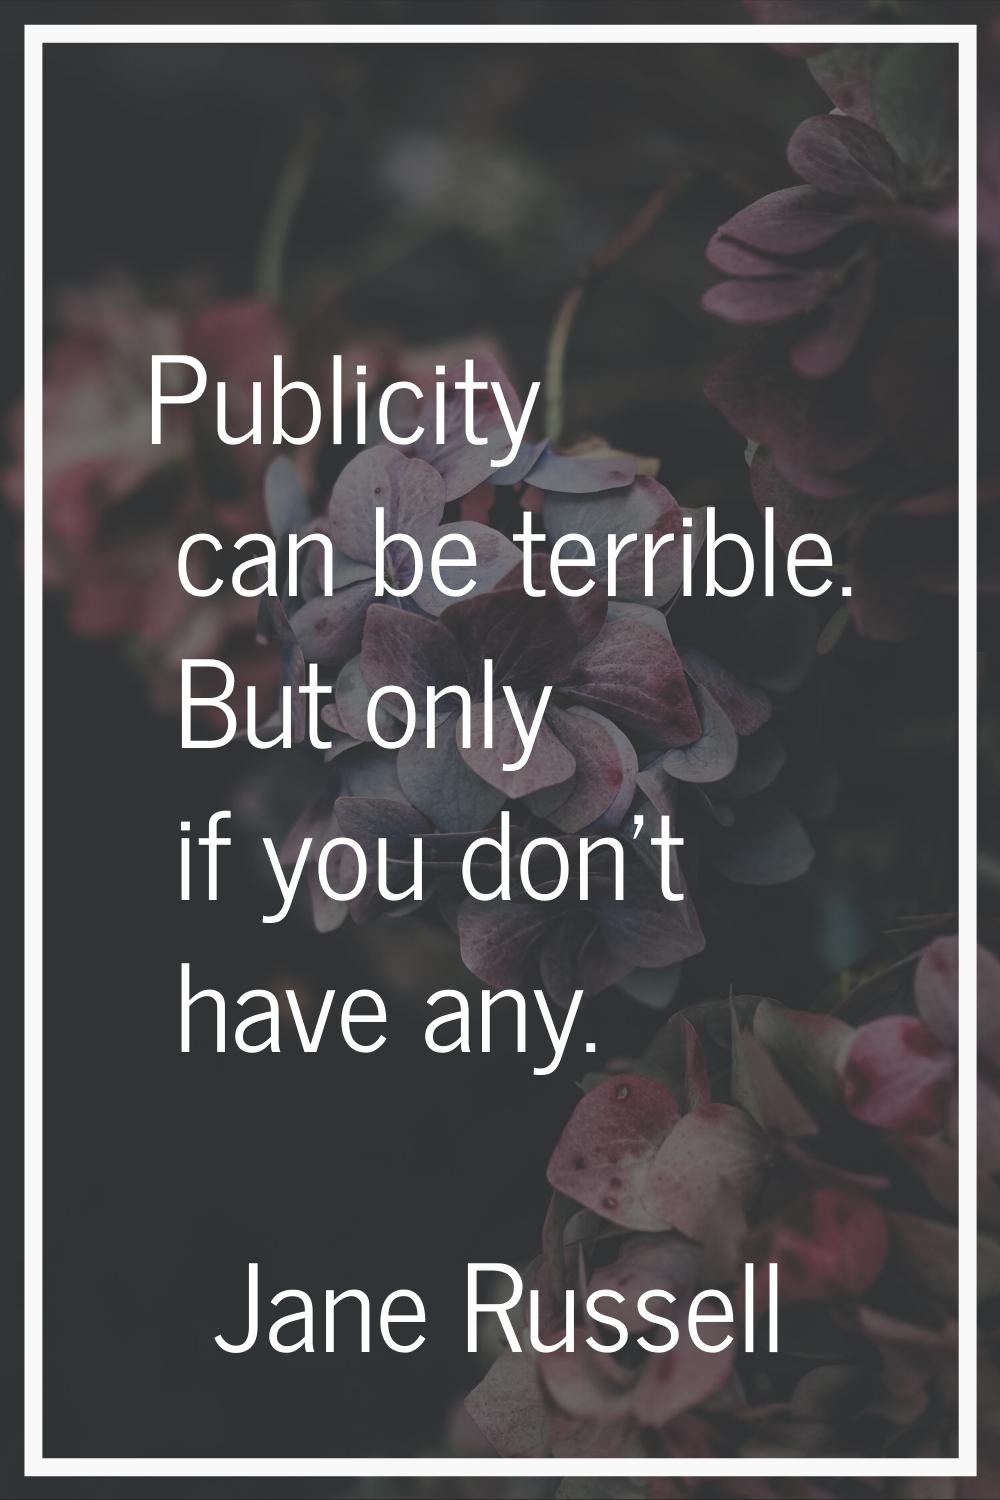 Publicity can be terrible. But only if you don't have any.